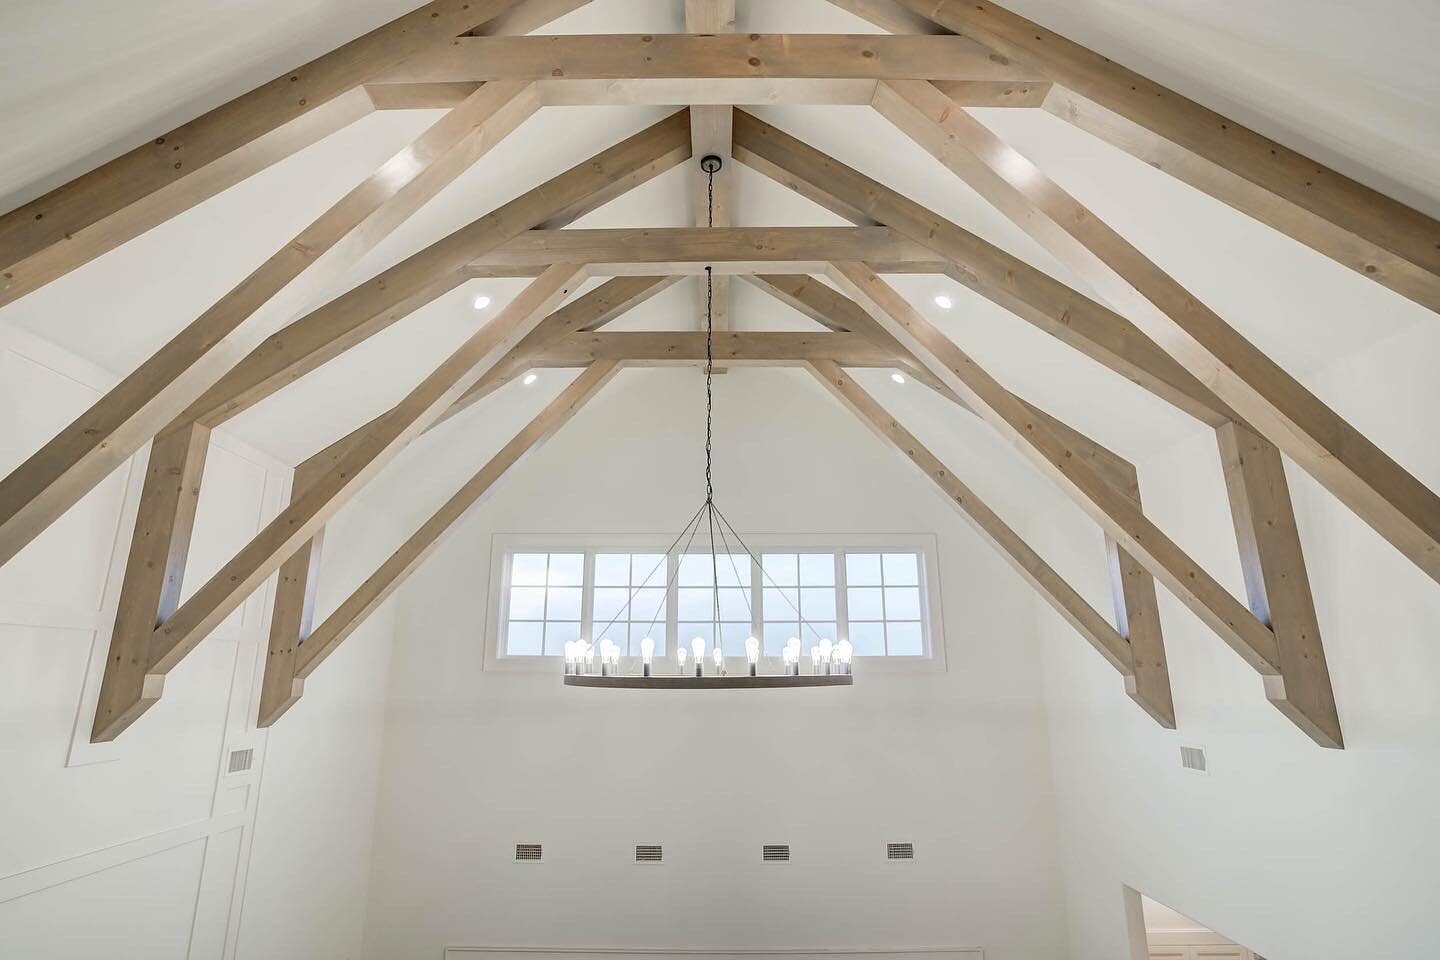 We worked with inspiration images of a gambrel roof + beamwork that followed the framing of the roof line. Although this home didn't have a gambrel roof, we created a custom beam pattern to imitate the feel of the gambrel.